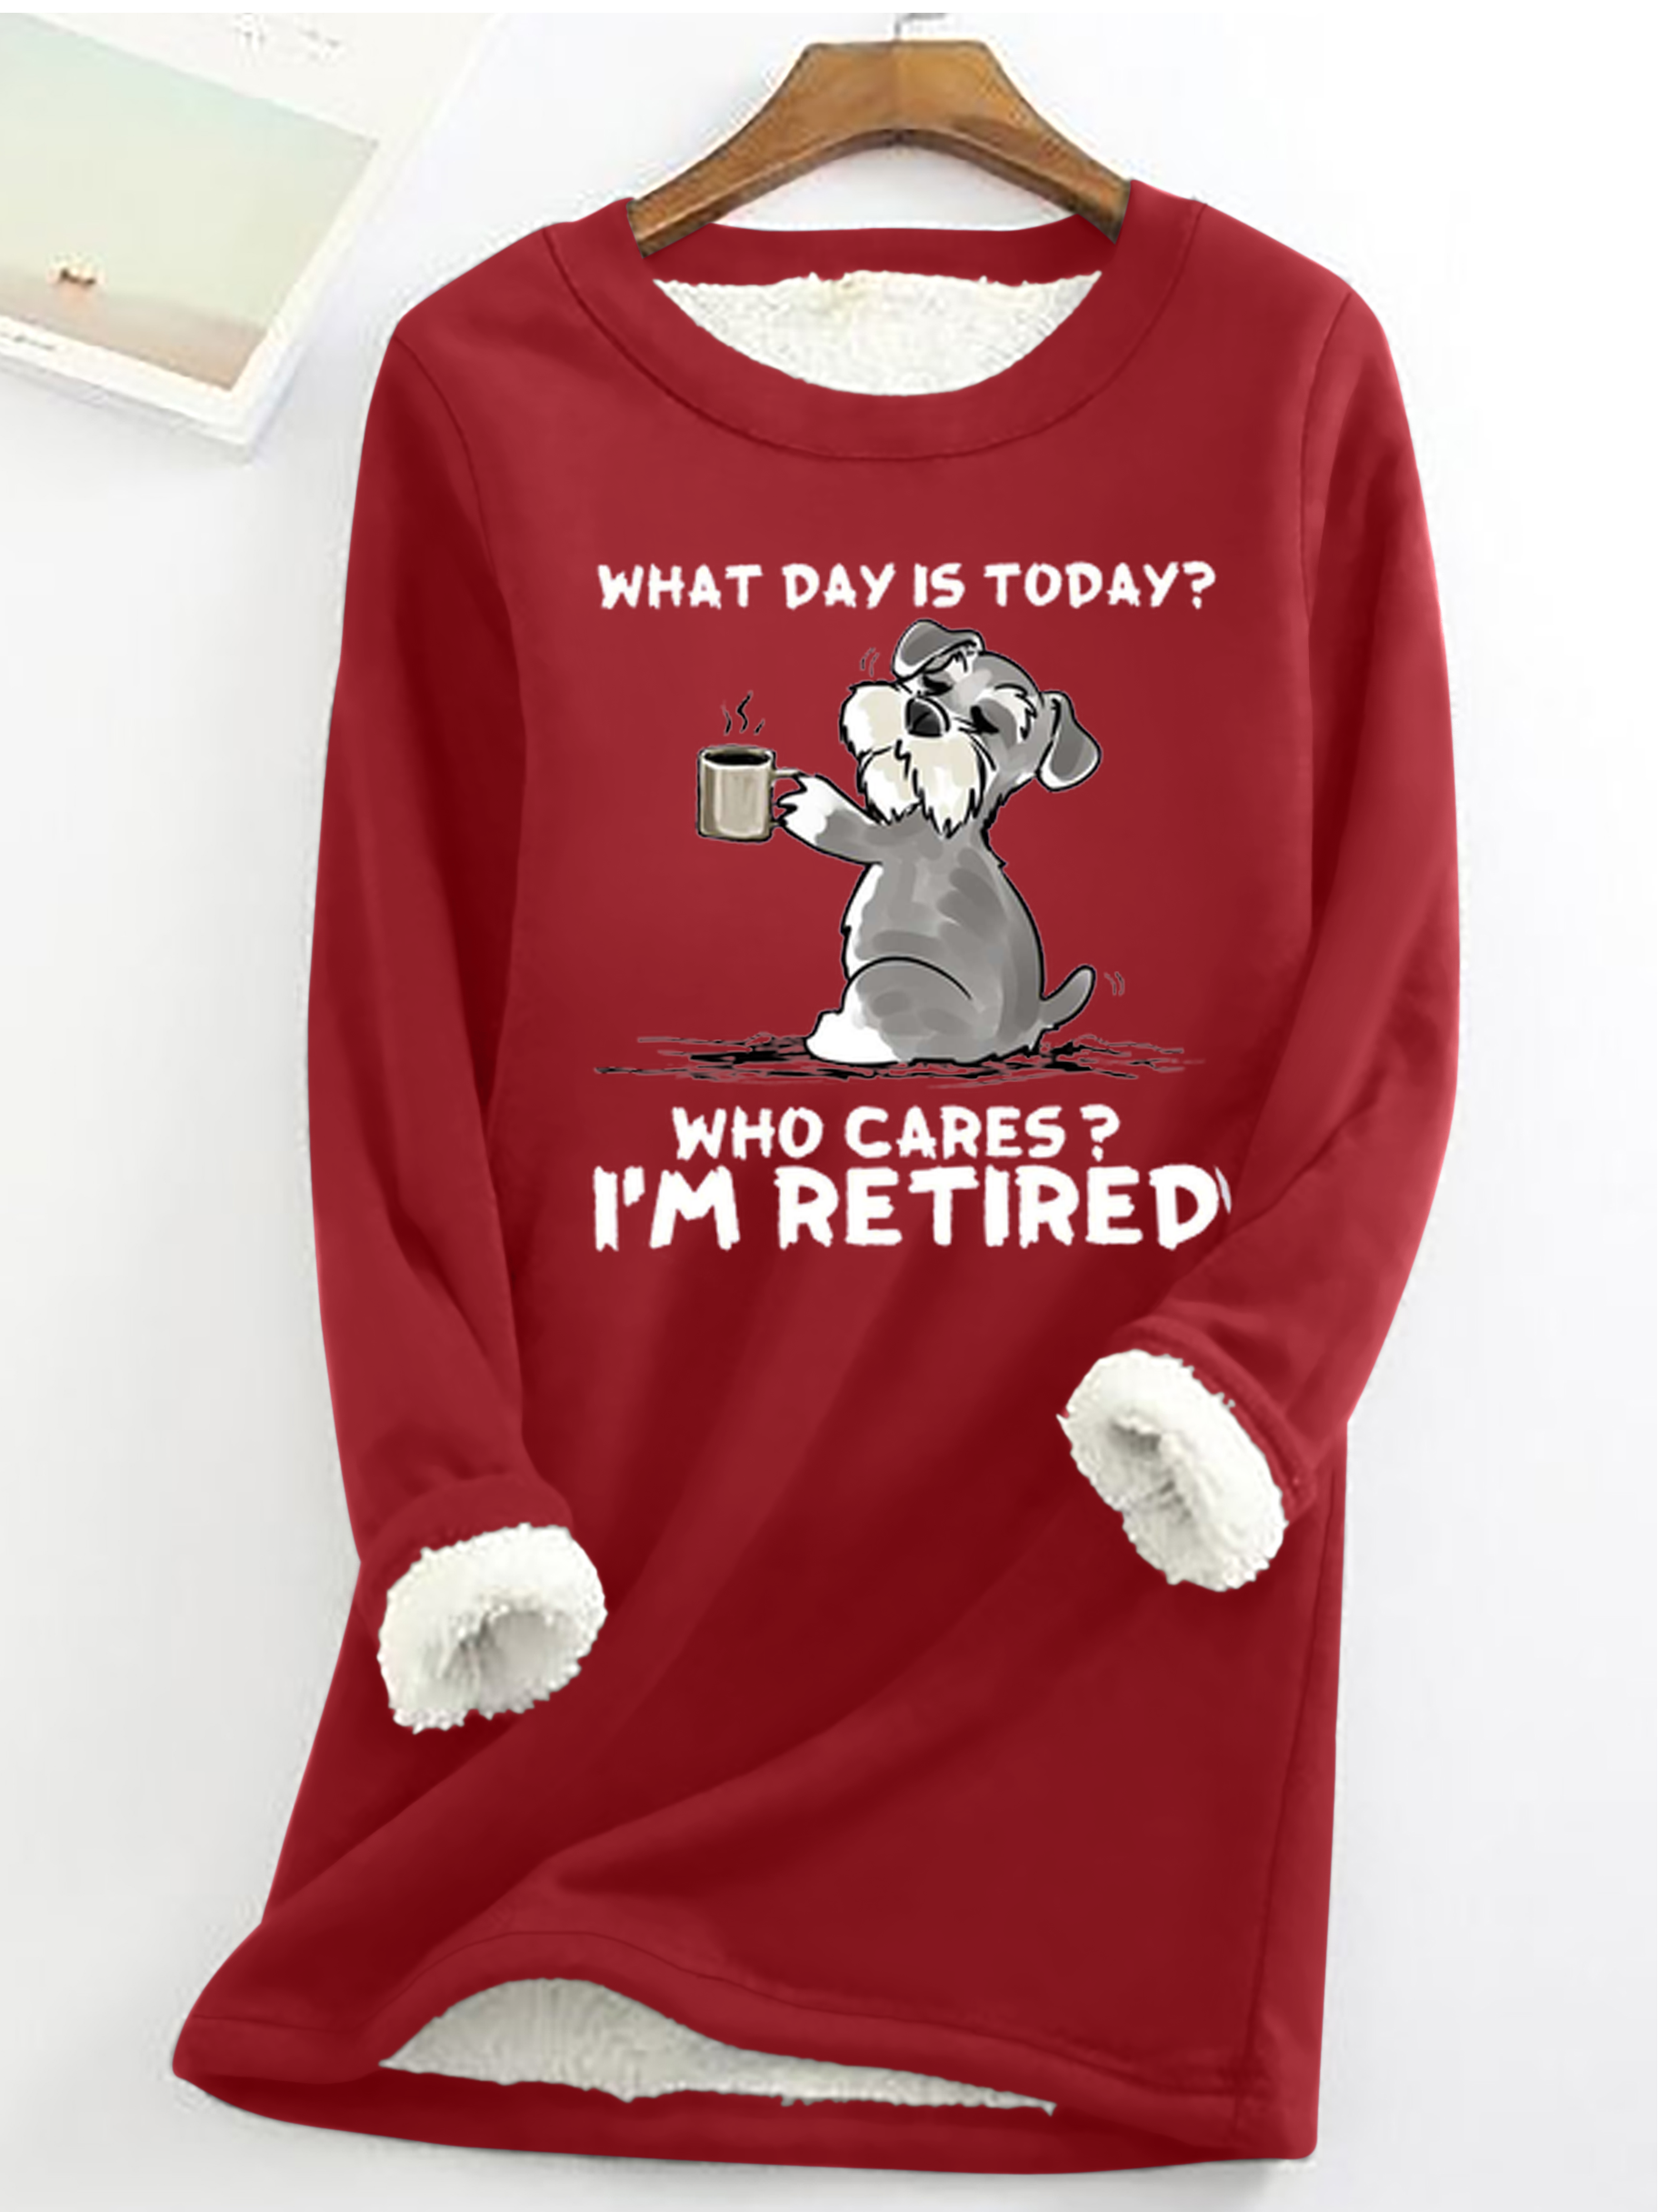 Women's What day is today? Who cares? I’m retired Casual Crew Neck Fleece Sweatshirt